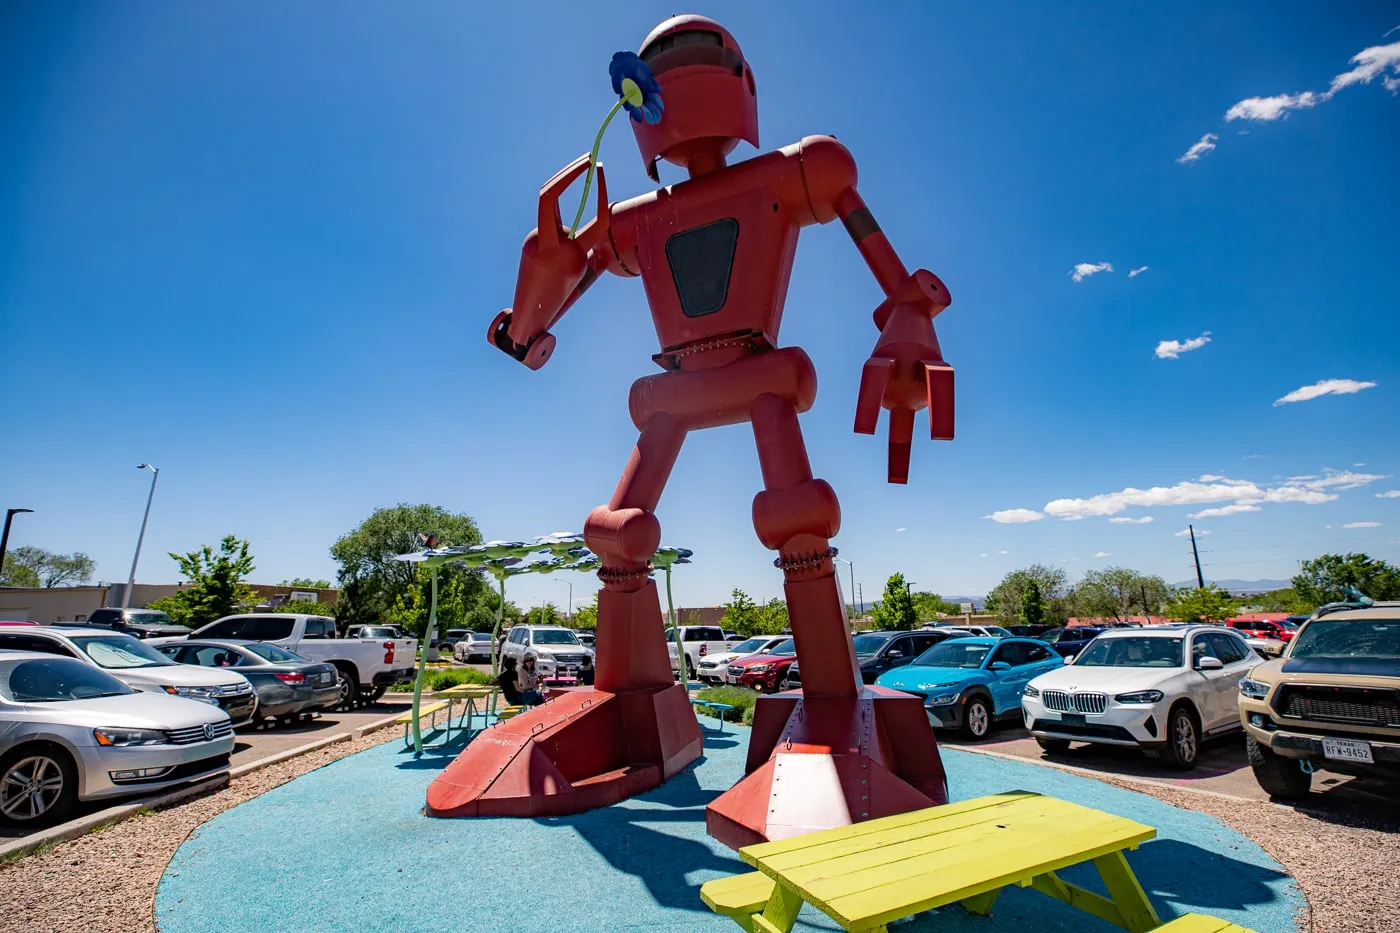 Becoming Human - Giant Robot at Meow Wolf in Santa Fe, New Mexico